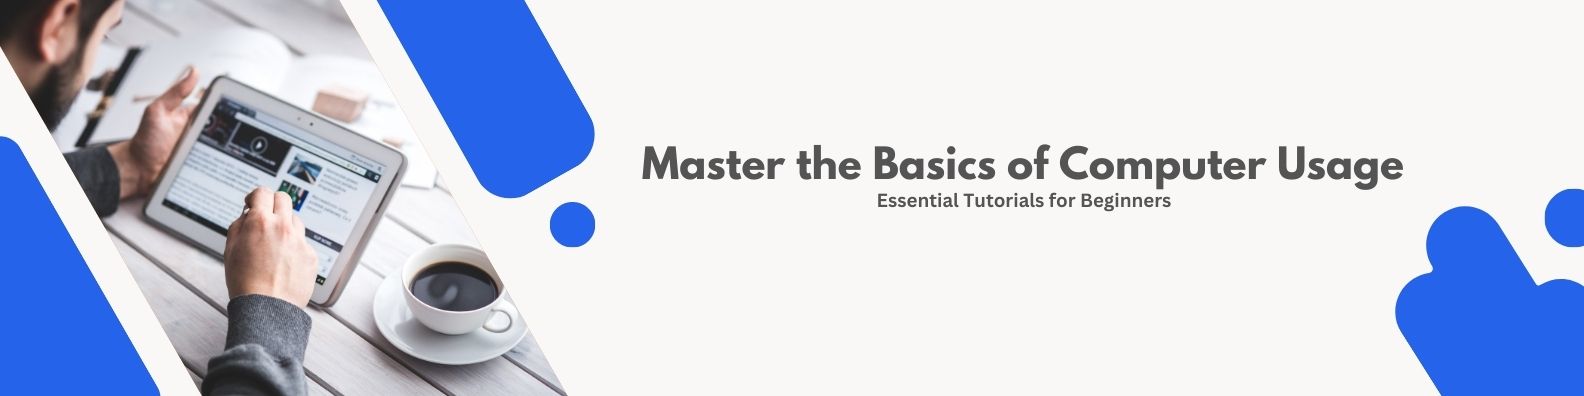 Master the Basics of Computer Usage Essential Tutorials for Beginners